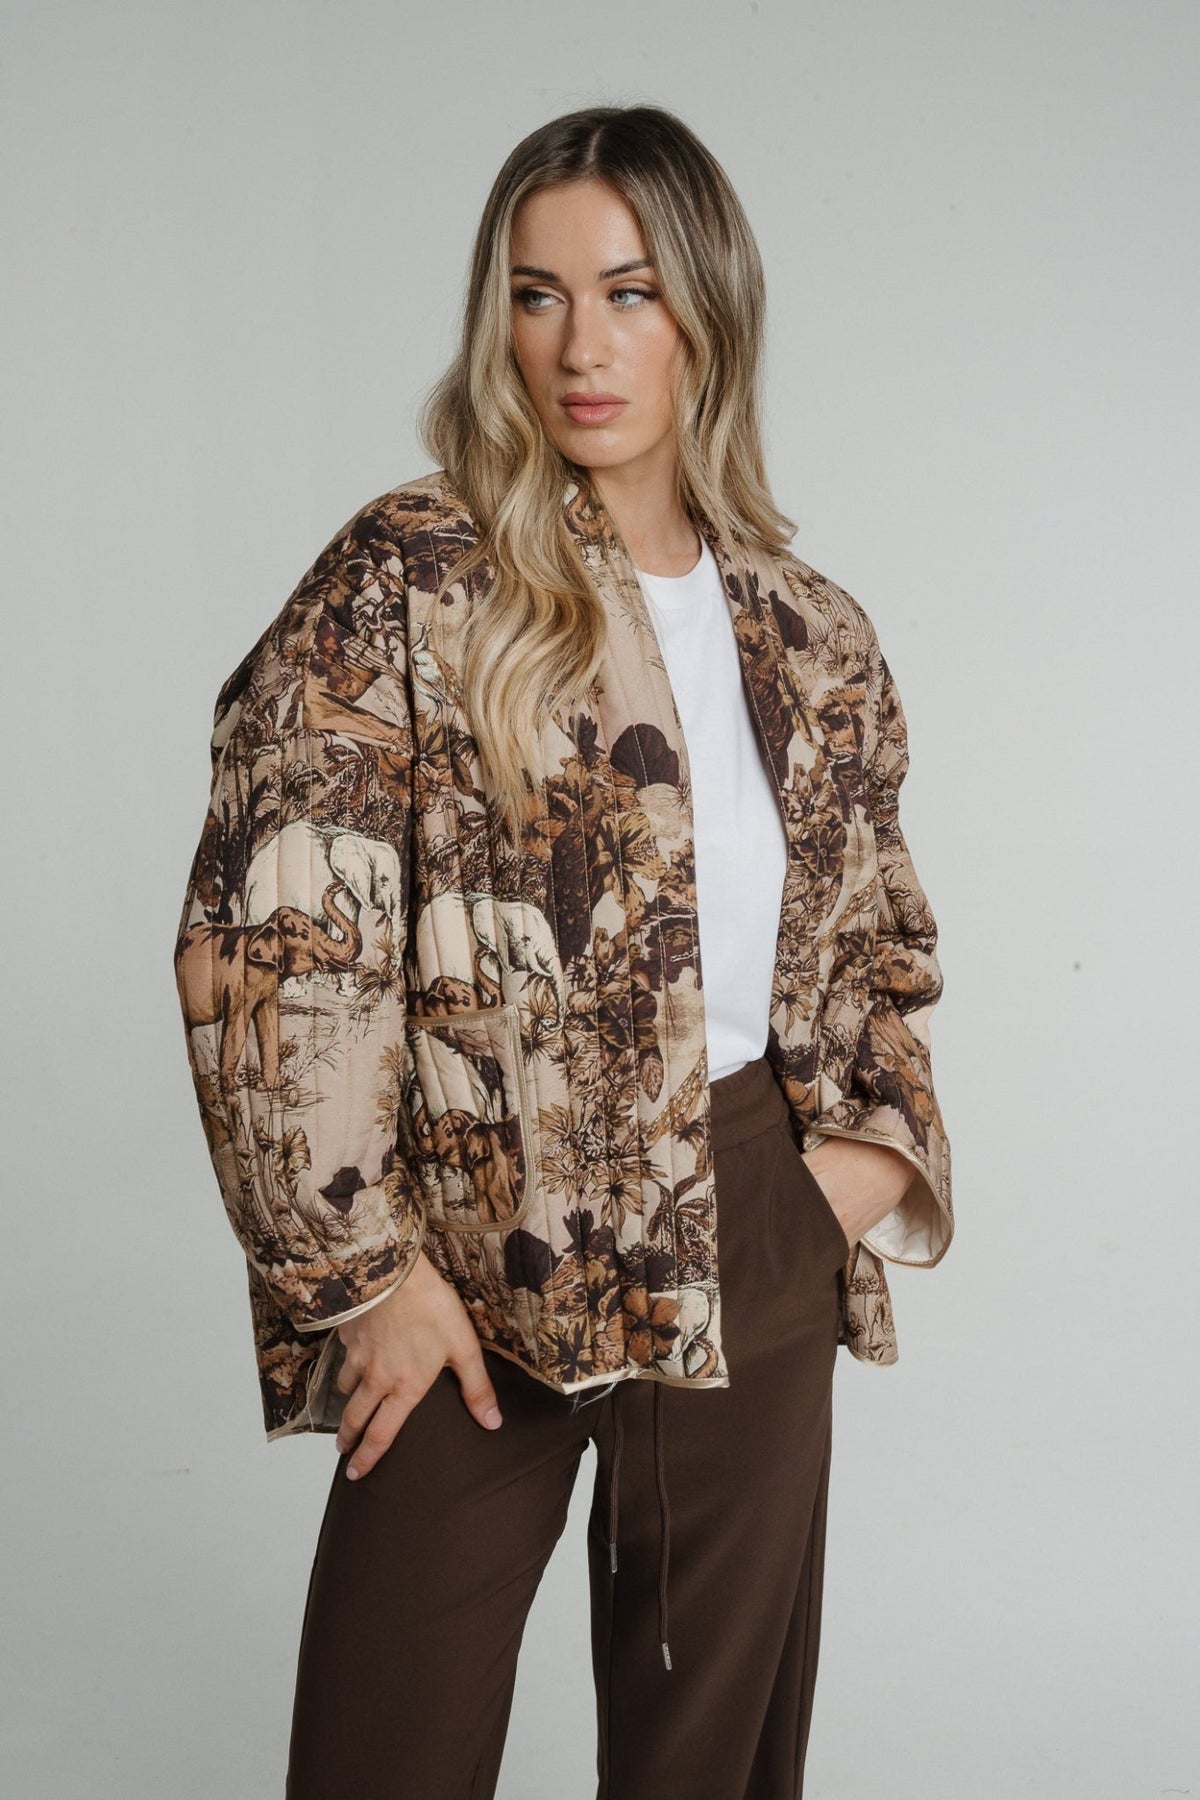 Indie Quilted Print Jacket In Tan Mix - The Walk in Wardrobe